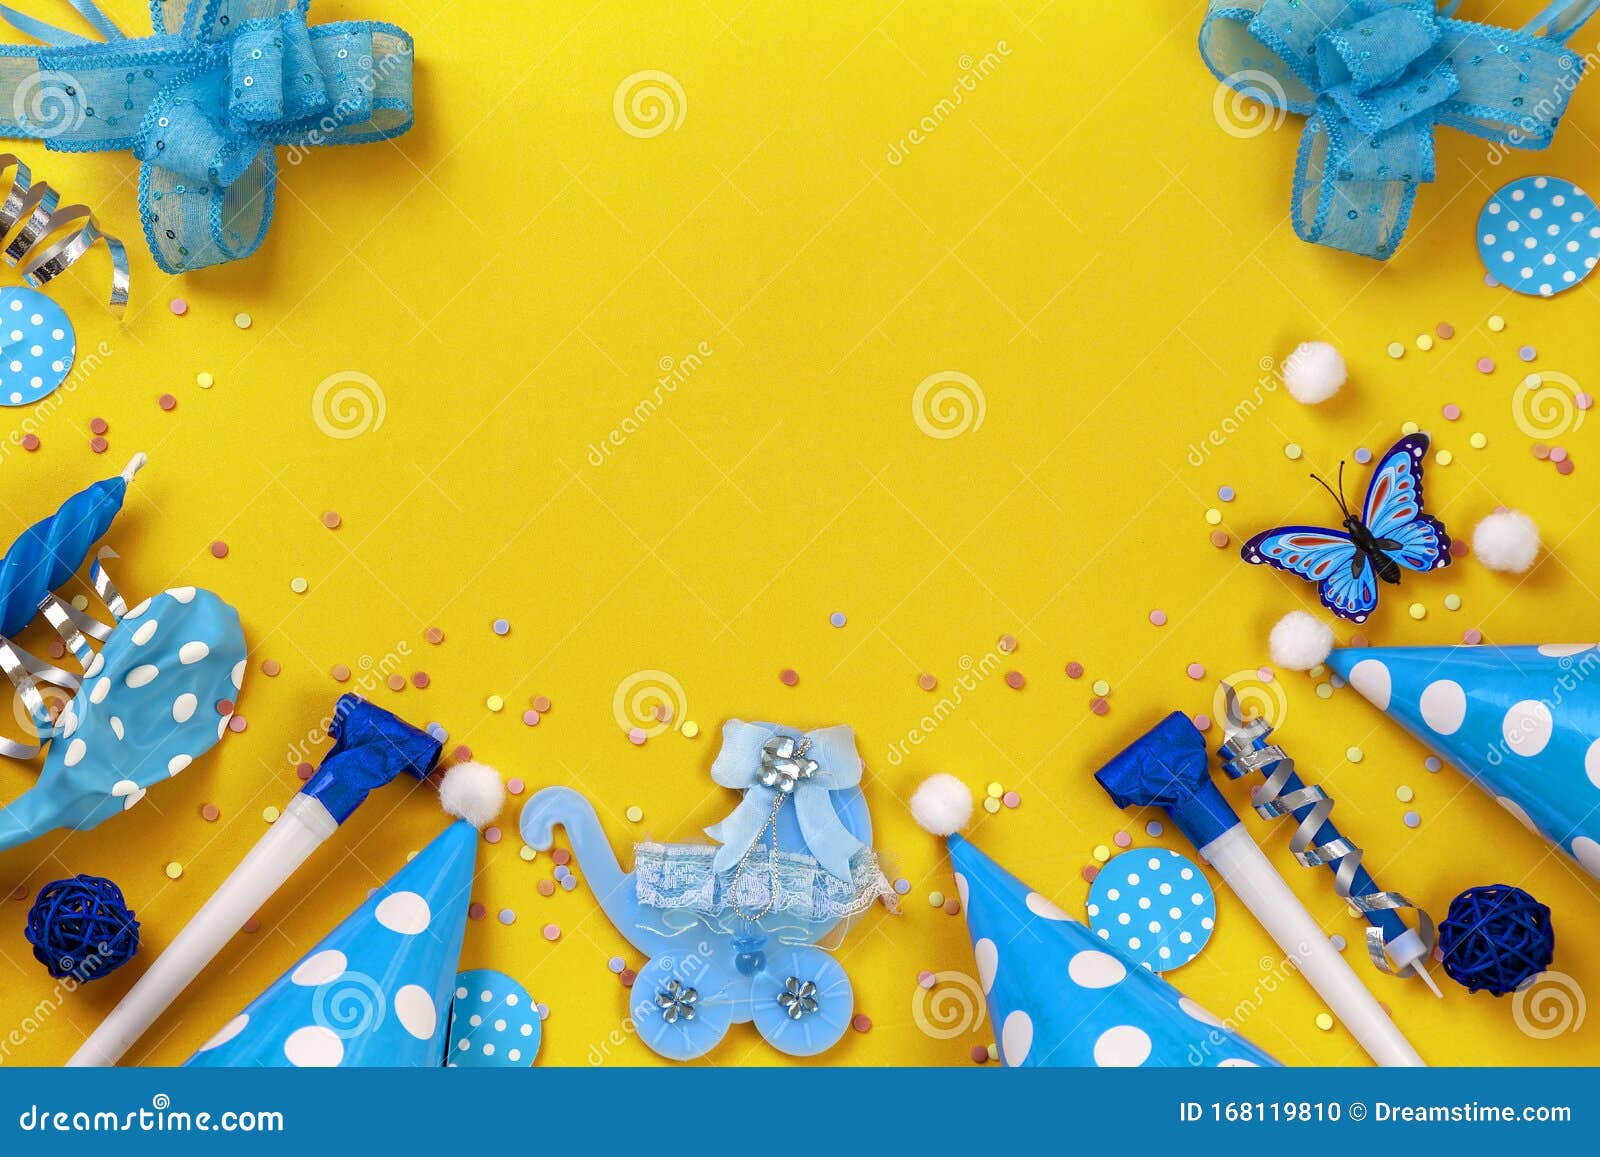 Colorful Birthday Boy or Carnival Frame with Party Items on Yellow  Background Stock Photo - Image of blue, space: 168119810